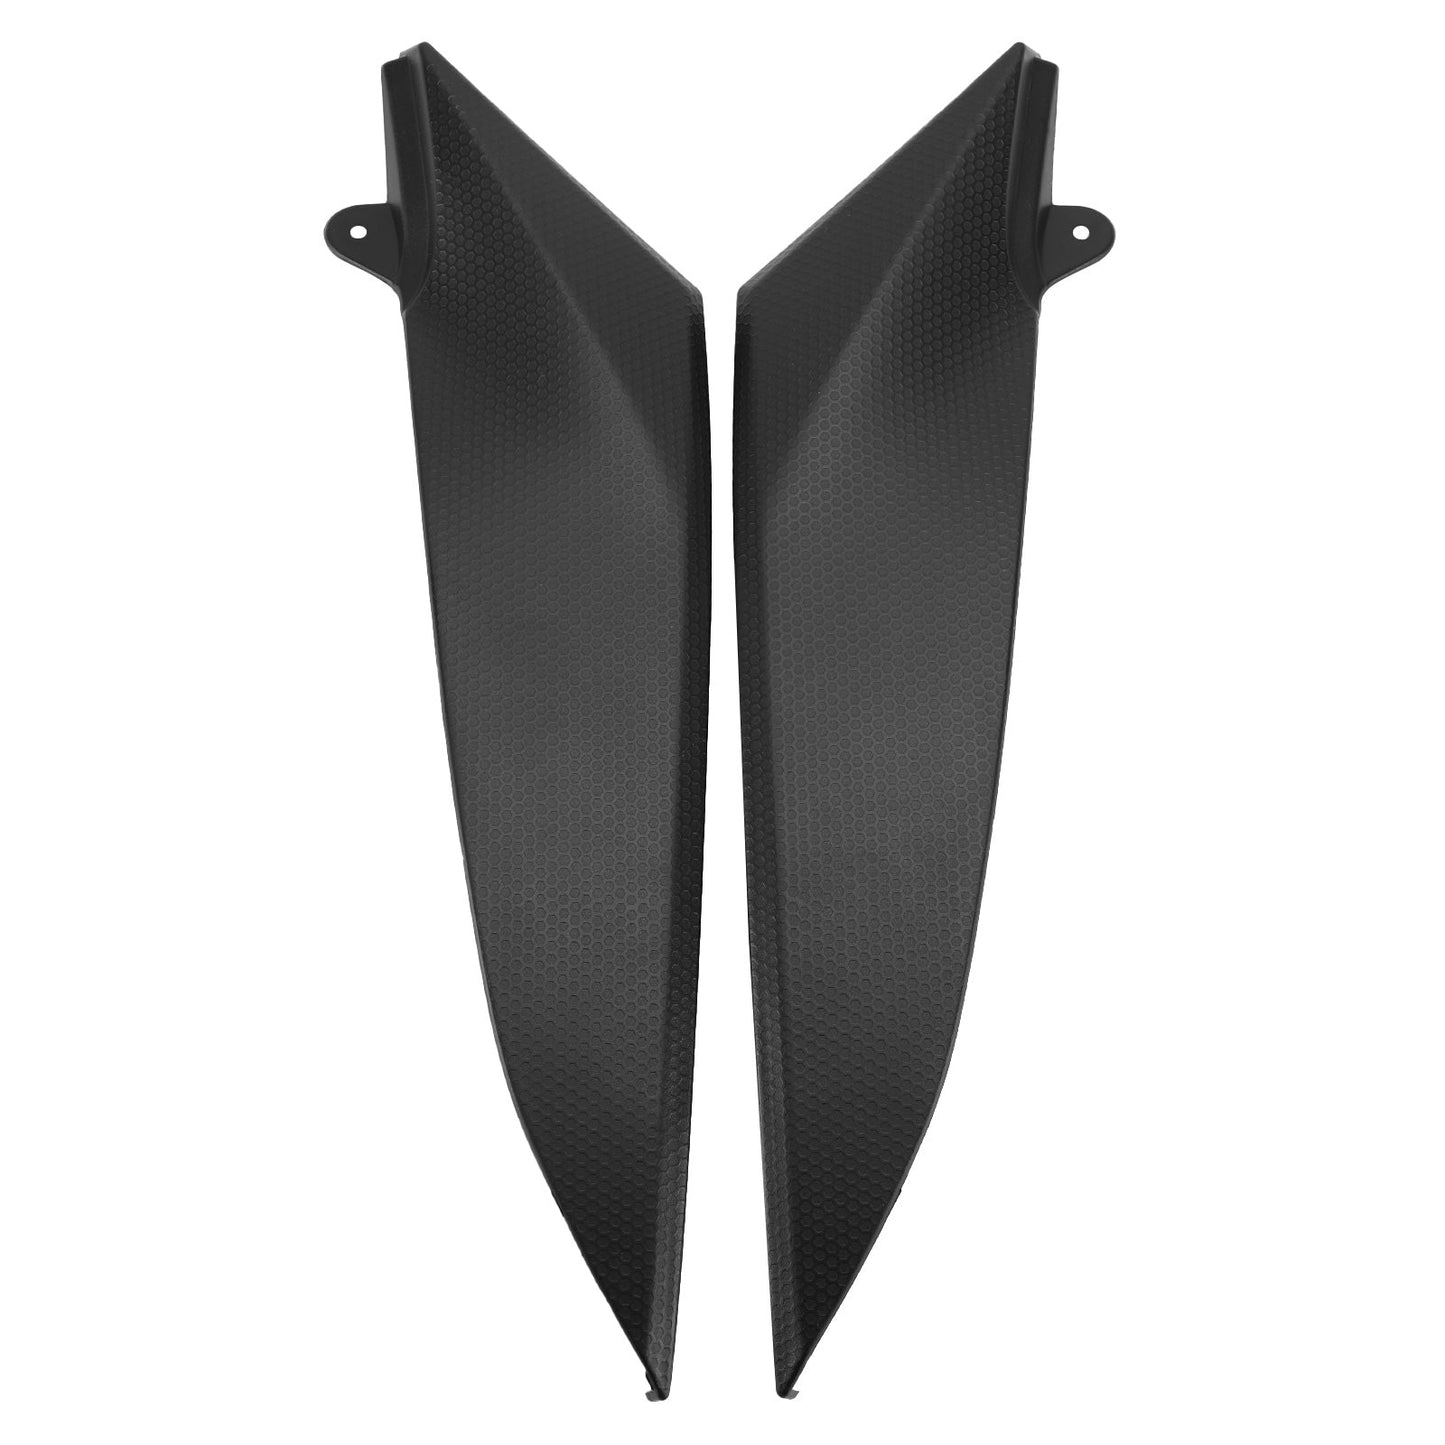 Gas Tank Side Trim Cover Panel Fairing Cowl for Yamaha YZF R1 2004-2006